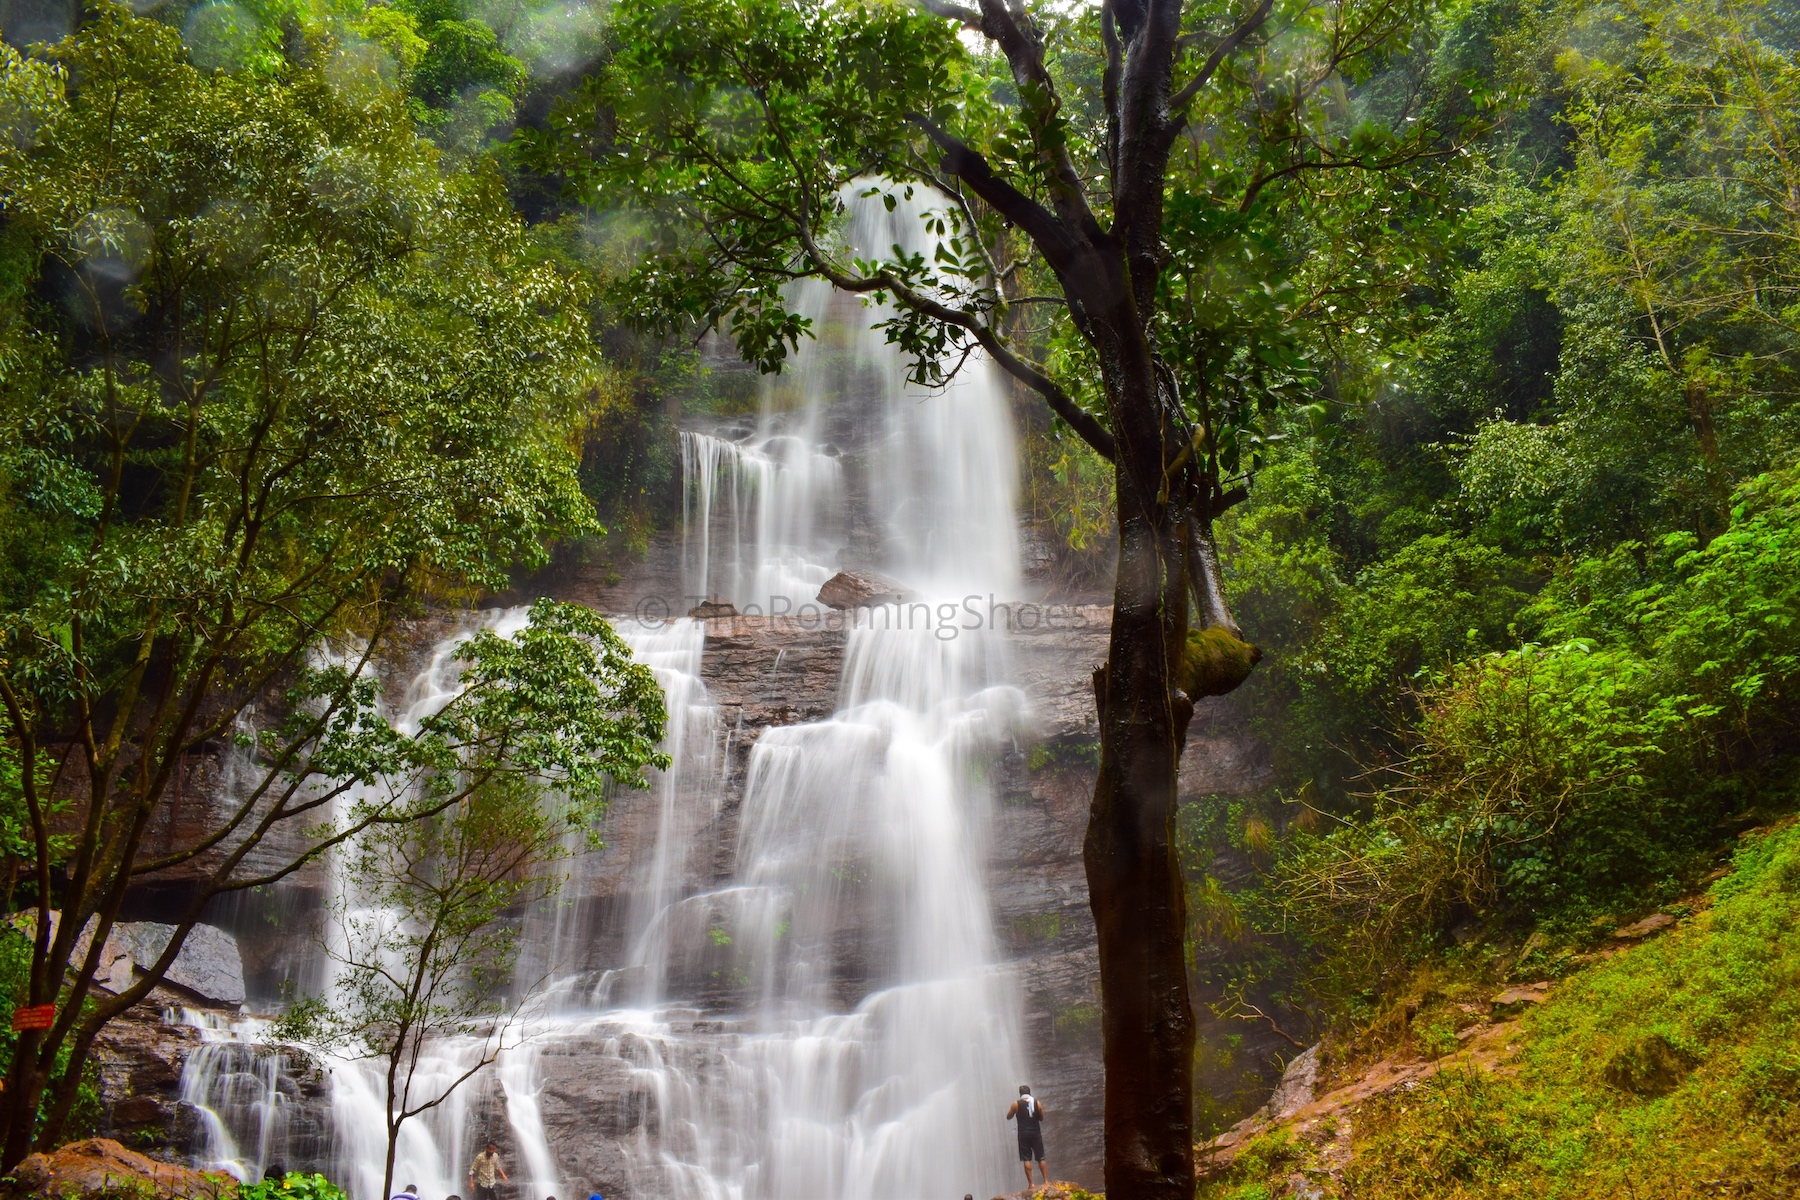 Things to Do In Chikmagalur